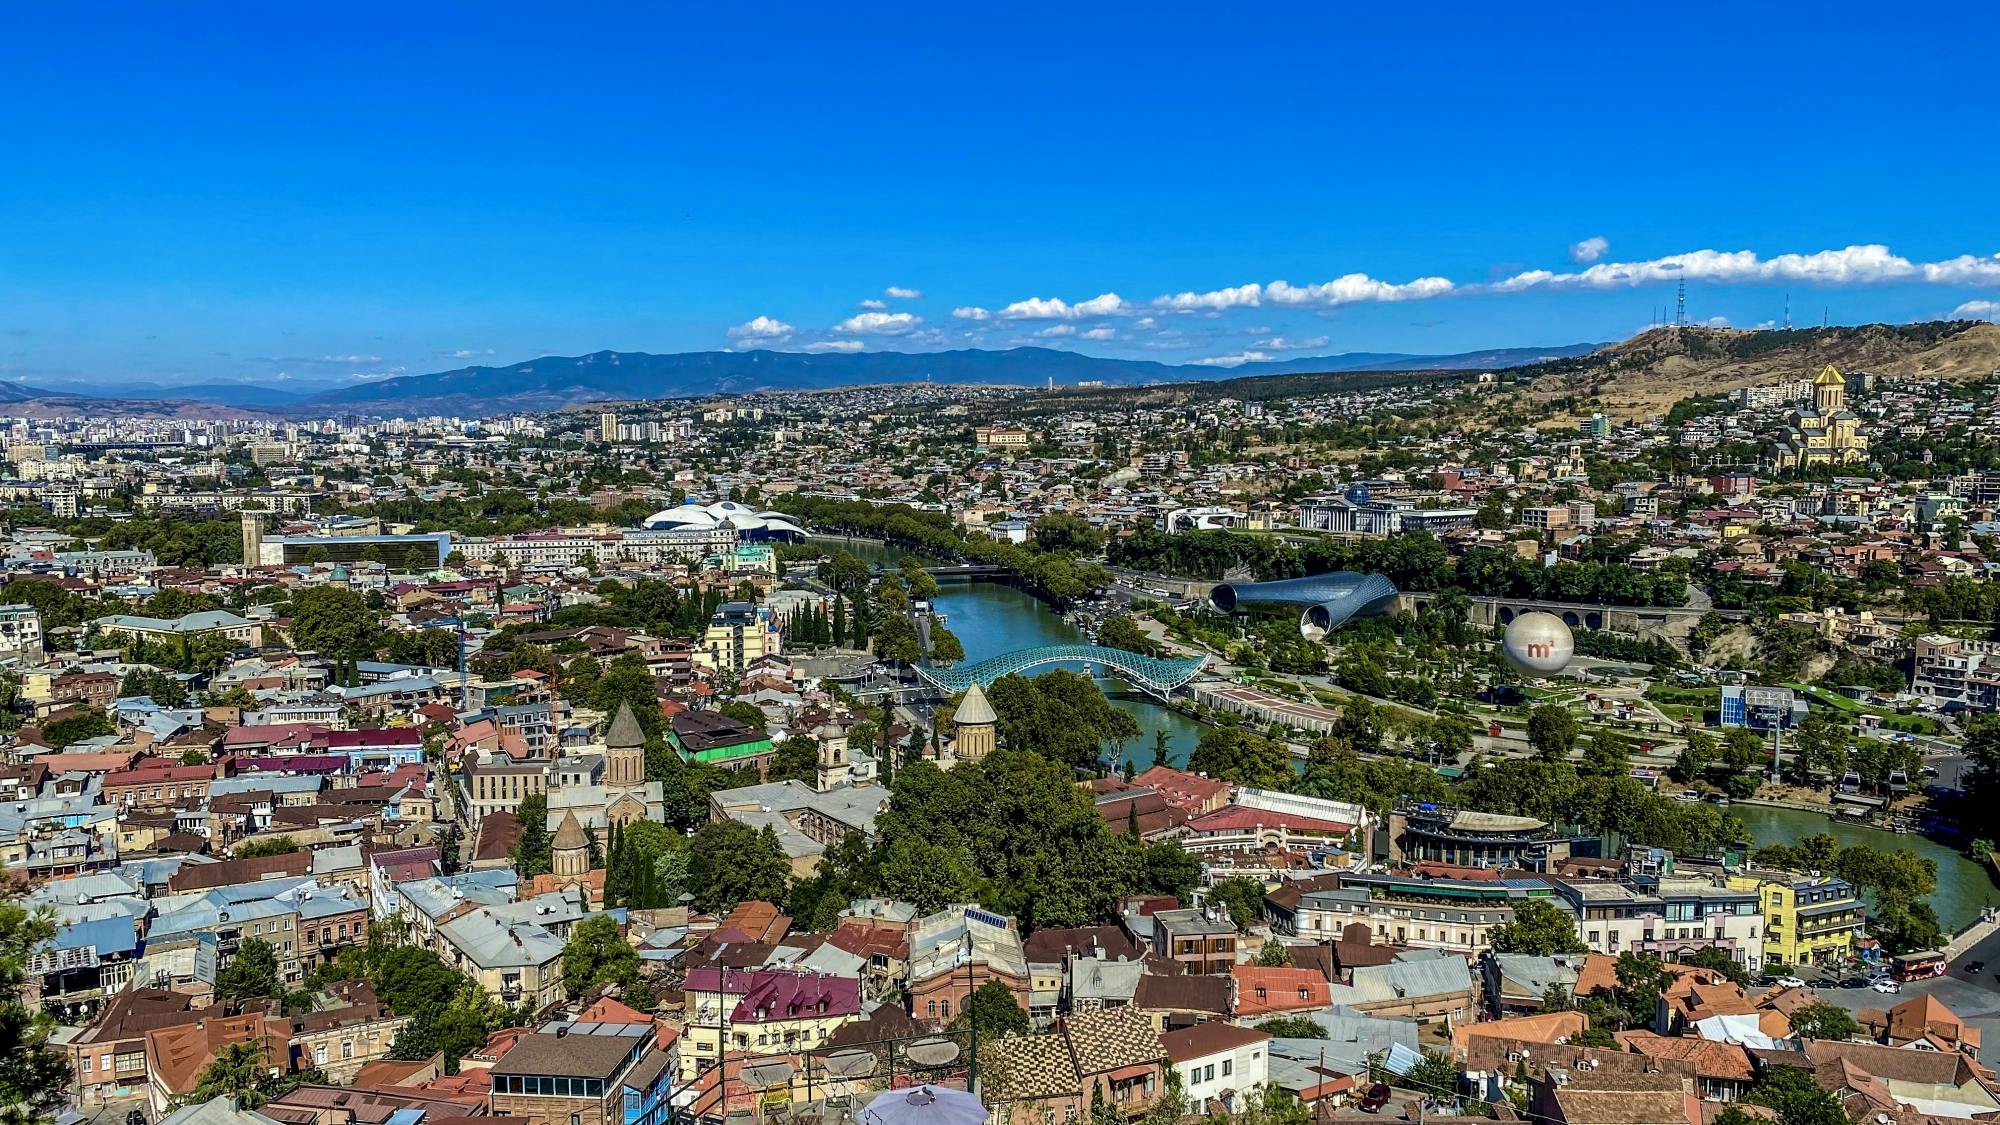 Tbilisi half day walking tour with cable car traditional bakery and wine tasting